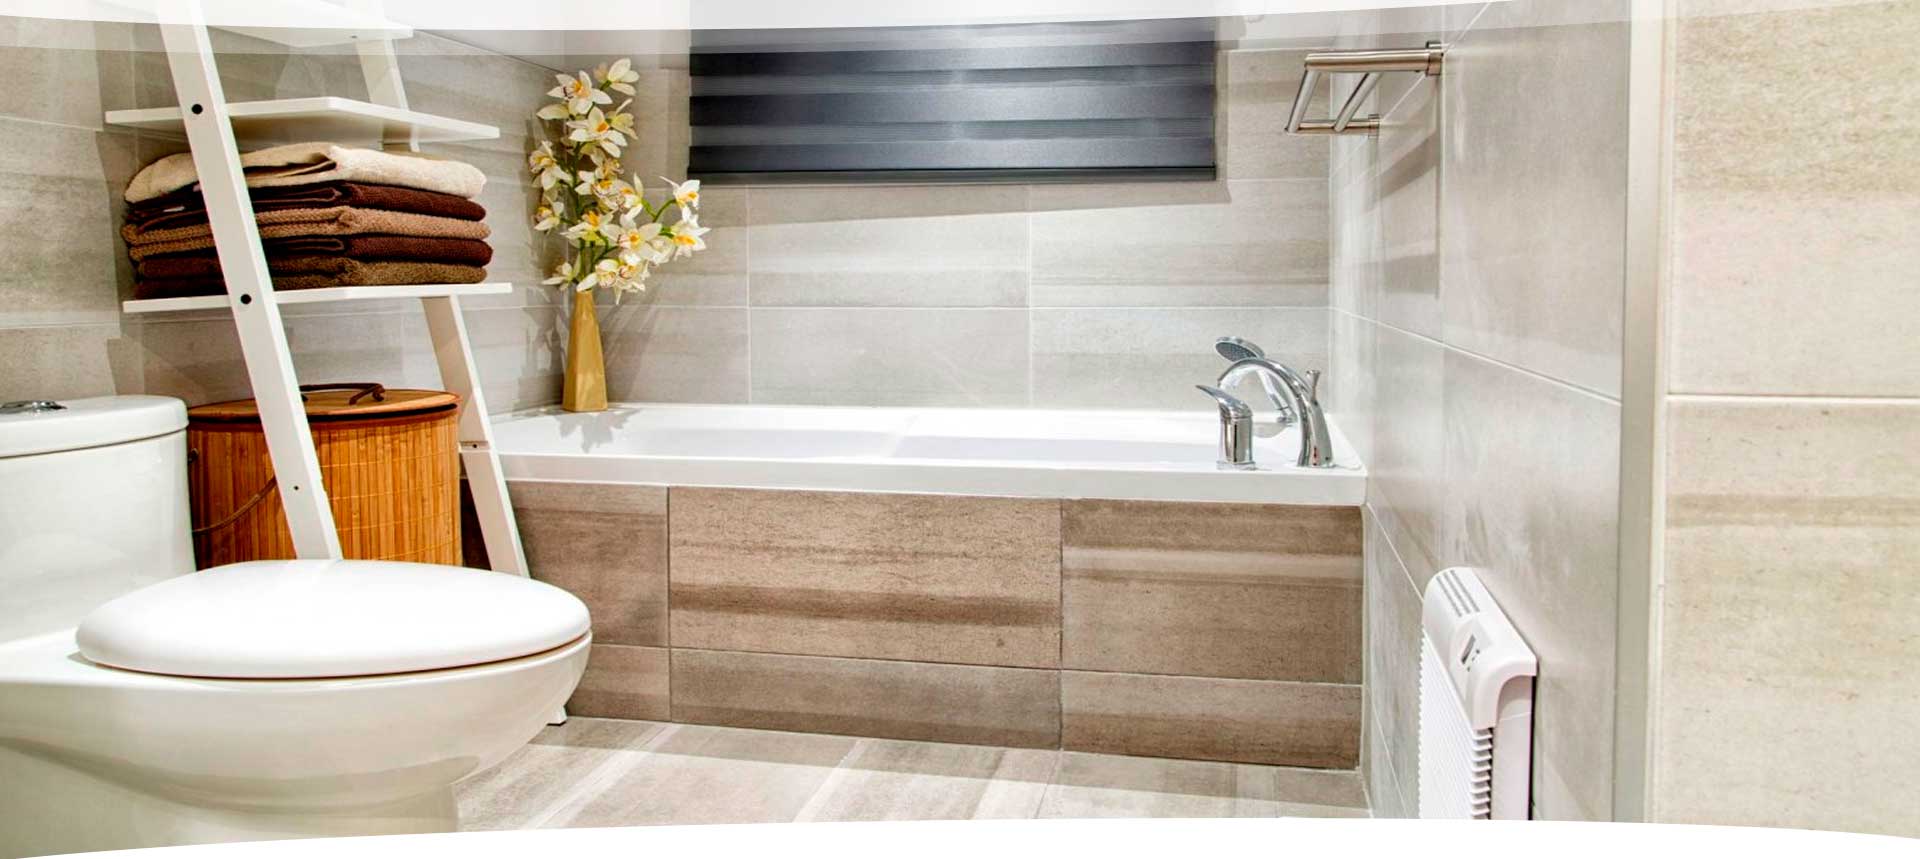 Cultured Marble Bathtubs Showers Sinks And Vanities Services In